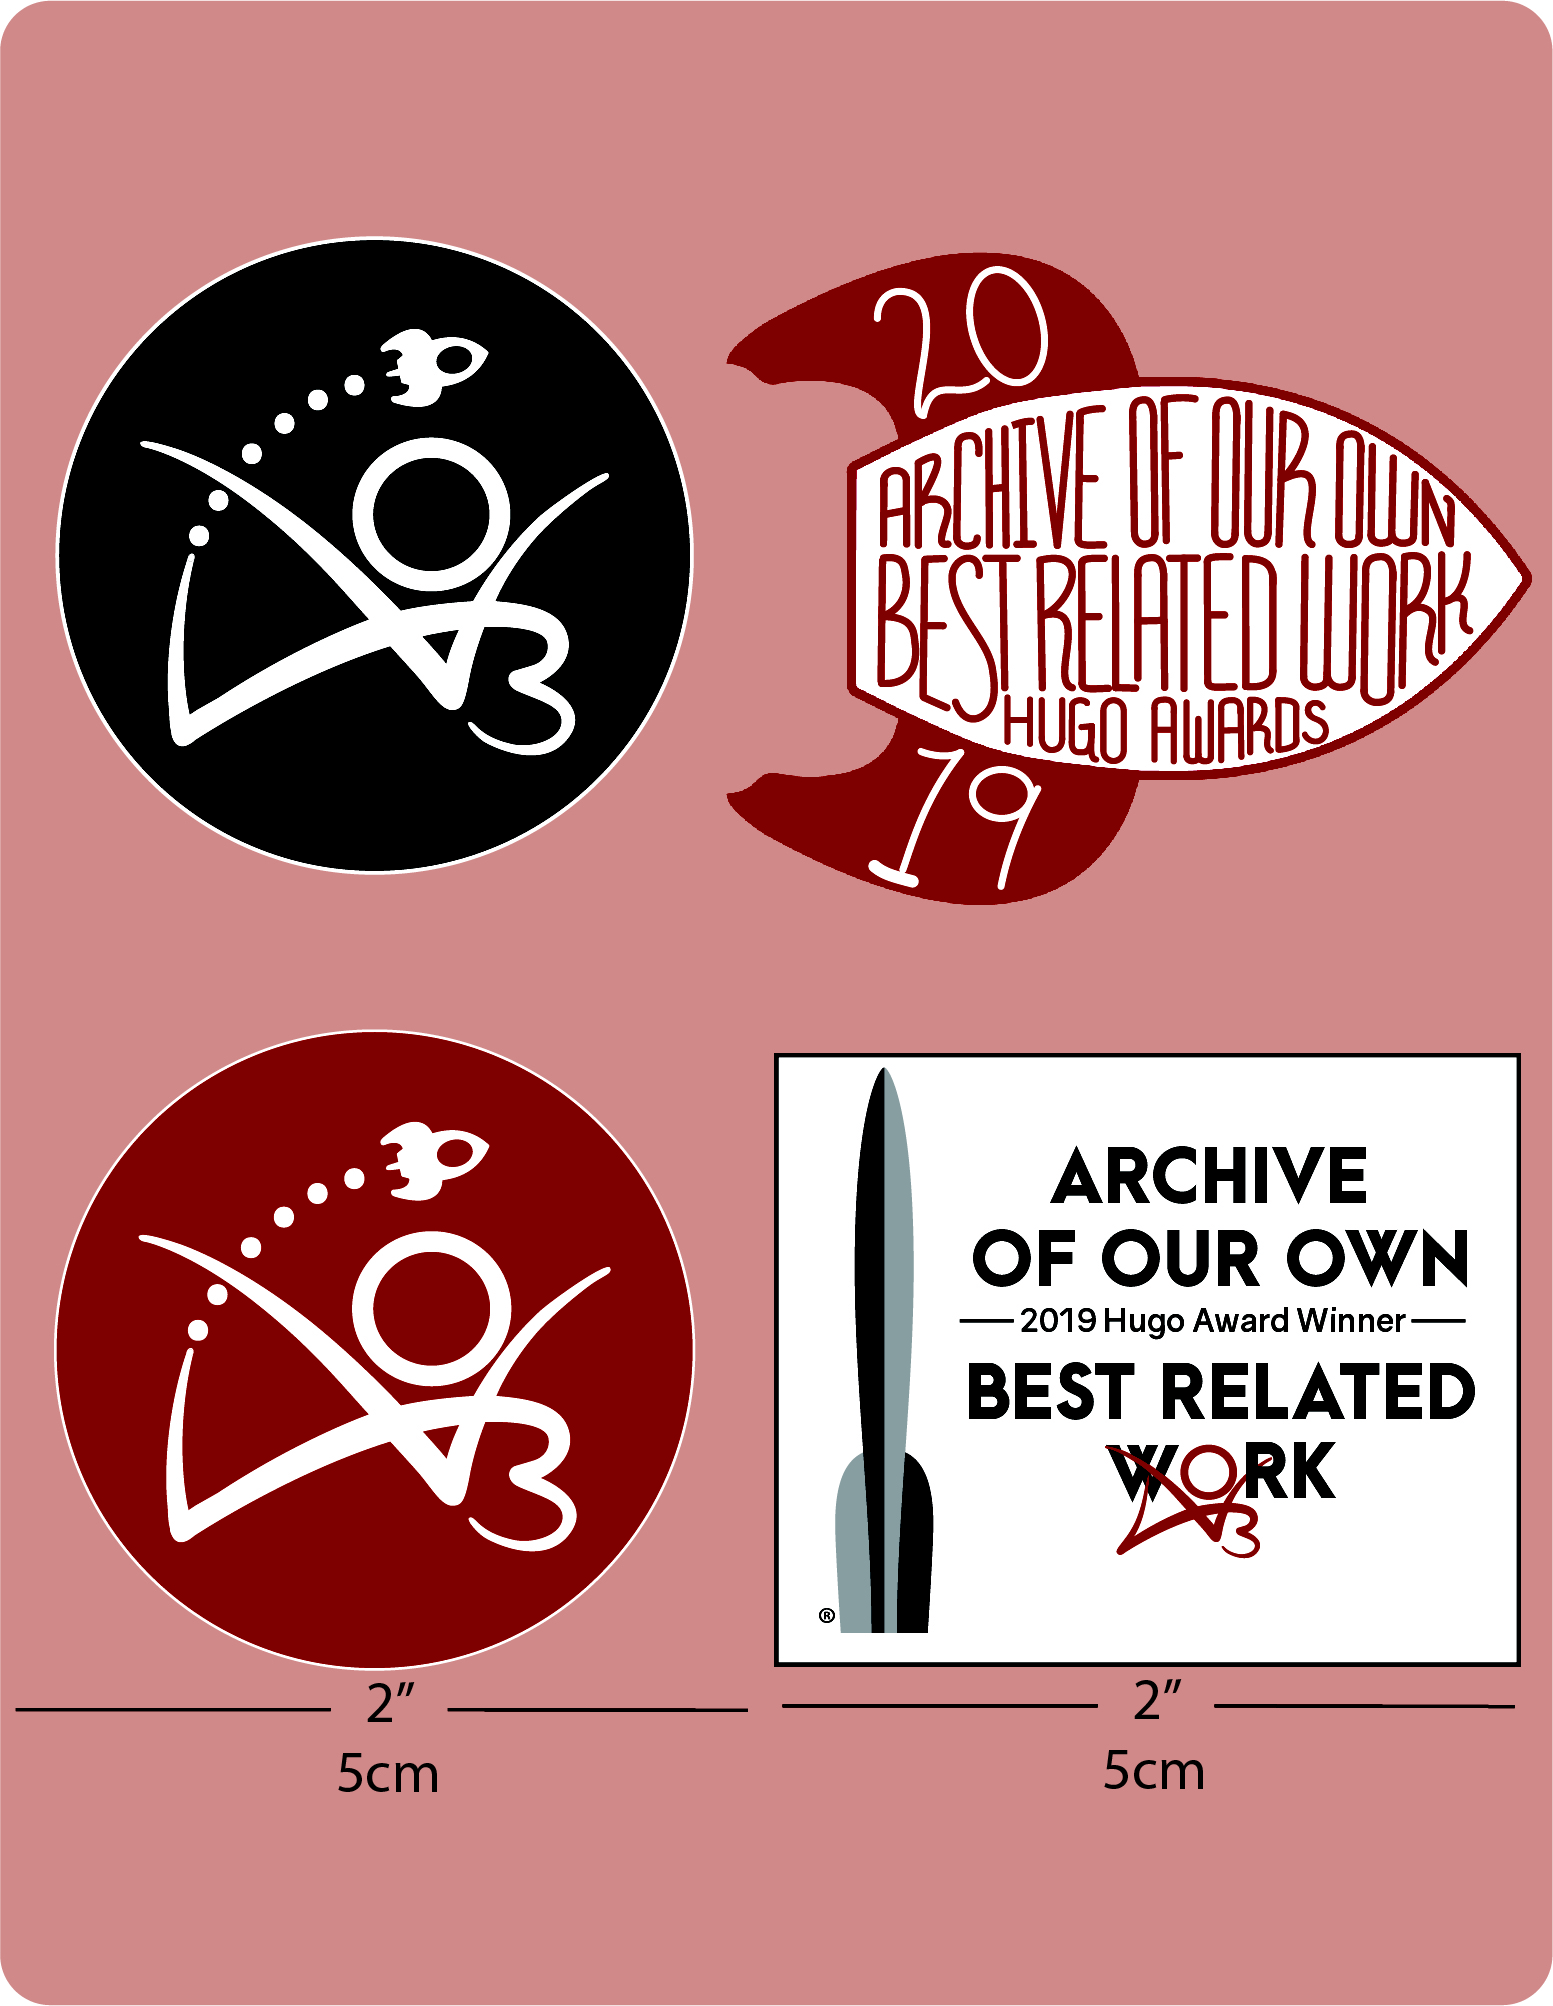 Hugo Award Sticker Set (contains four stickers measuring 5cm). The first two are circular, with a small rocket flying above the AO3 logo. (1) is red, and (2) is black. (3) A rectangle with the Hugo logo next to the words "Archive of Our Own - 2019 Hugo Award Winner - Best Related Work." and (4) a stylised rocket with the words "Archive of Our Own, Best Related Work, Hugo Awards" handwritten inside the body and the year "2019" on the rocket's fins.